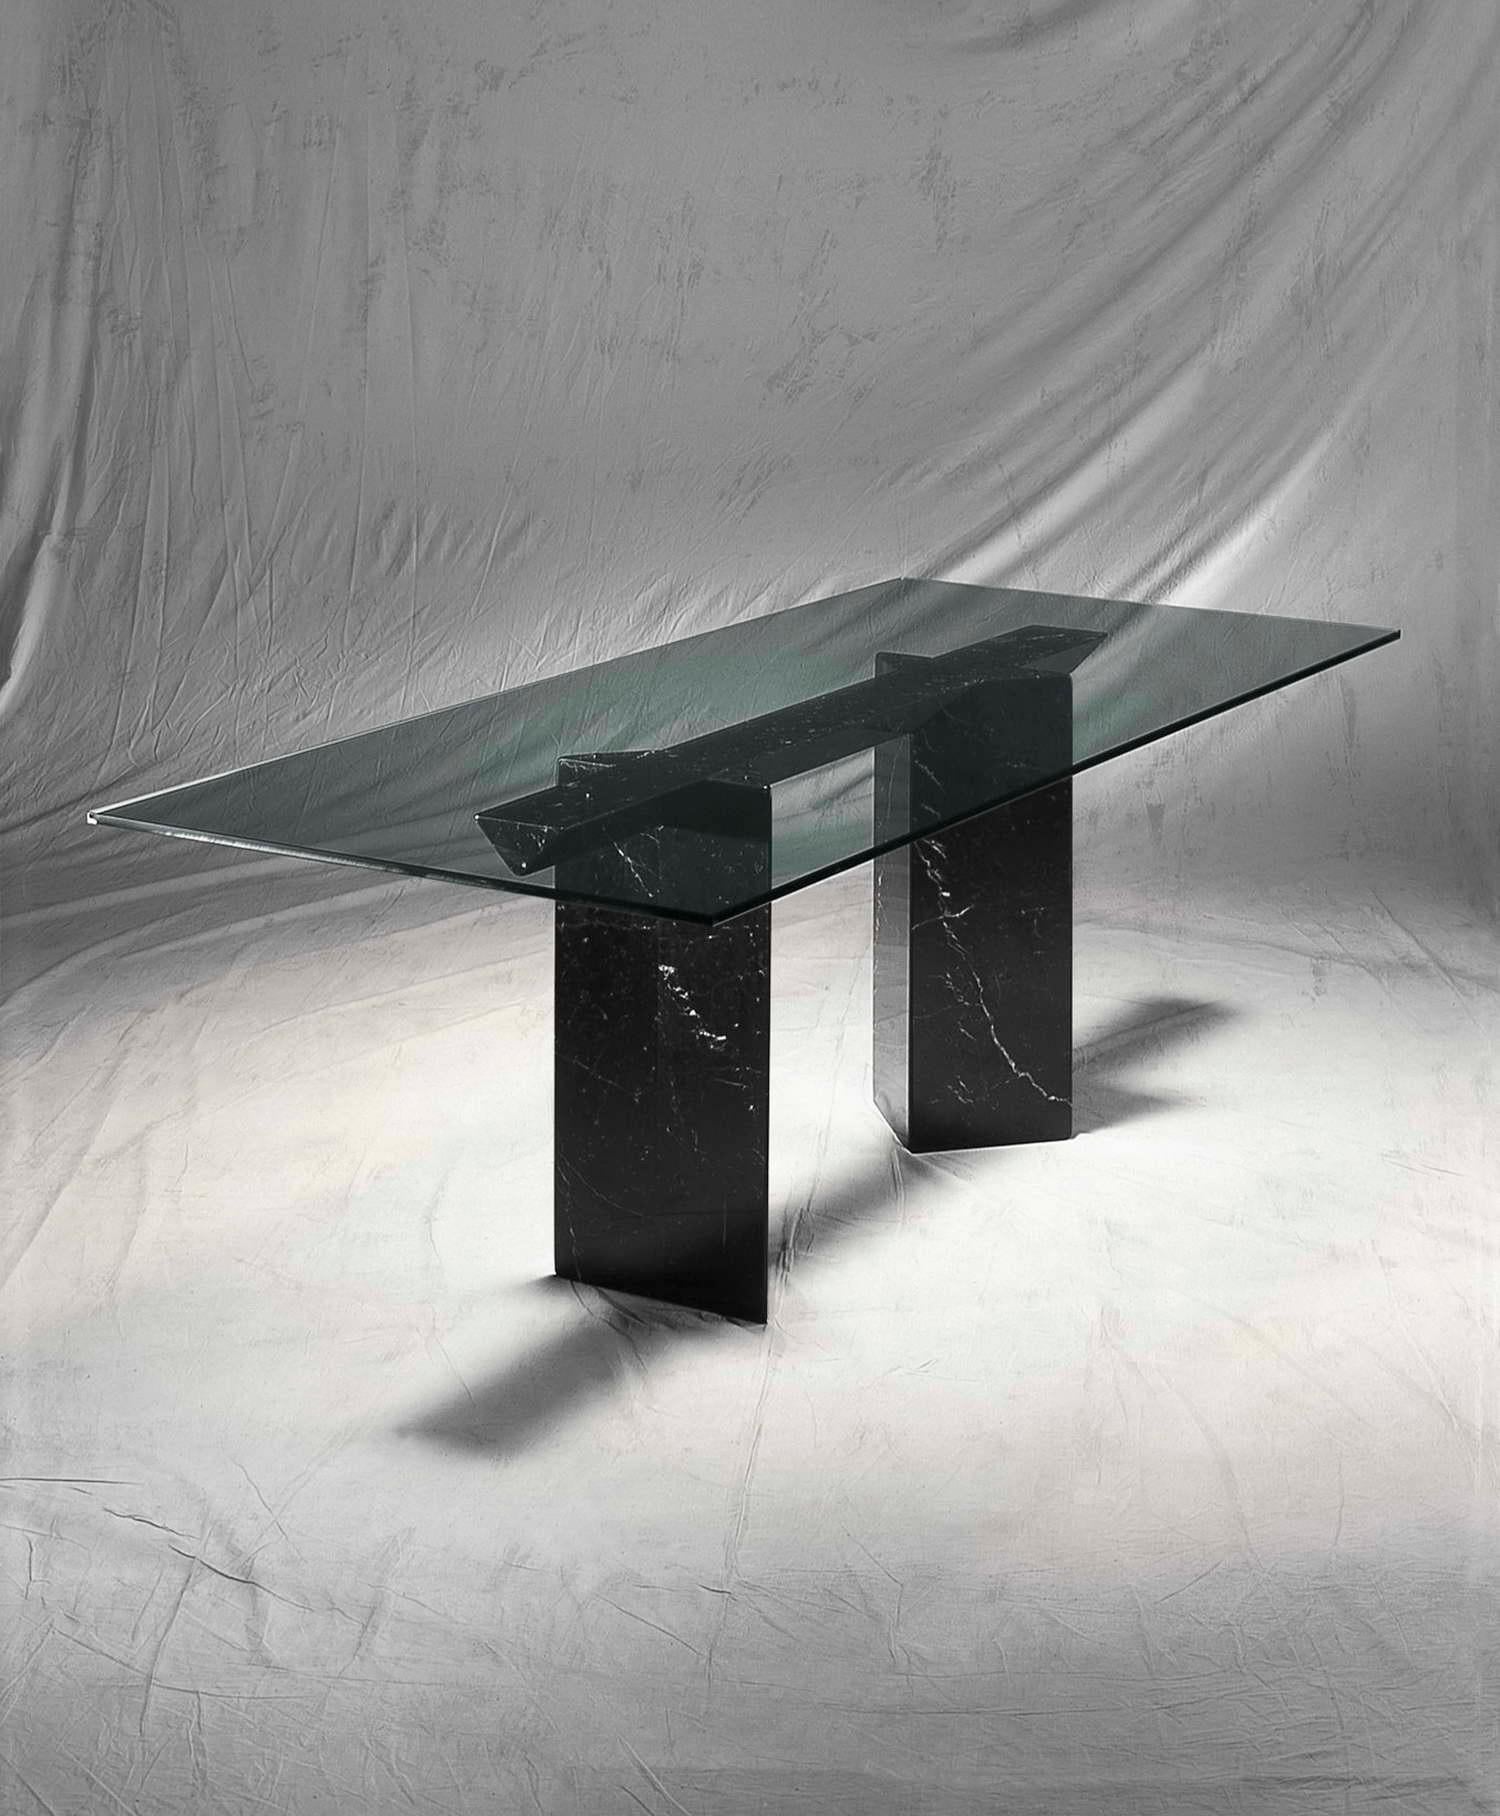 Marble dining table designed by Arch. Giulio Lazzotti

Size: cm. 180 x 130 x 73 H .
Materials: Bianco Carrara or Nero Marquina.
 